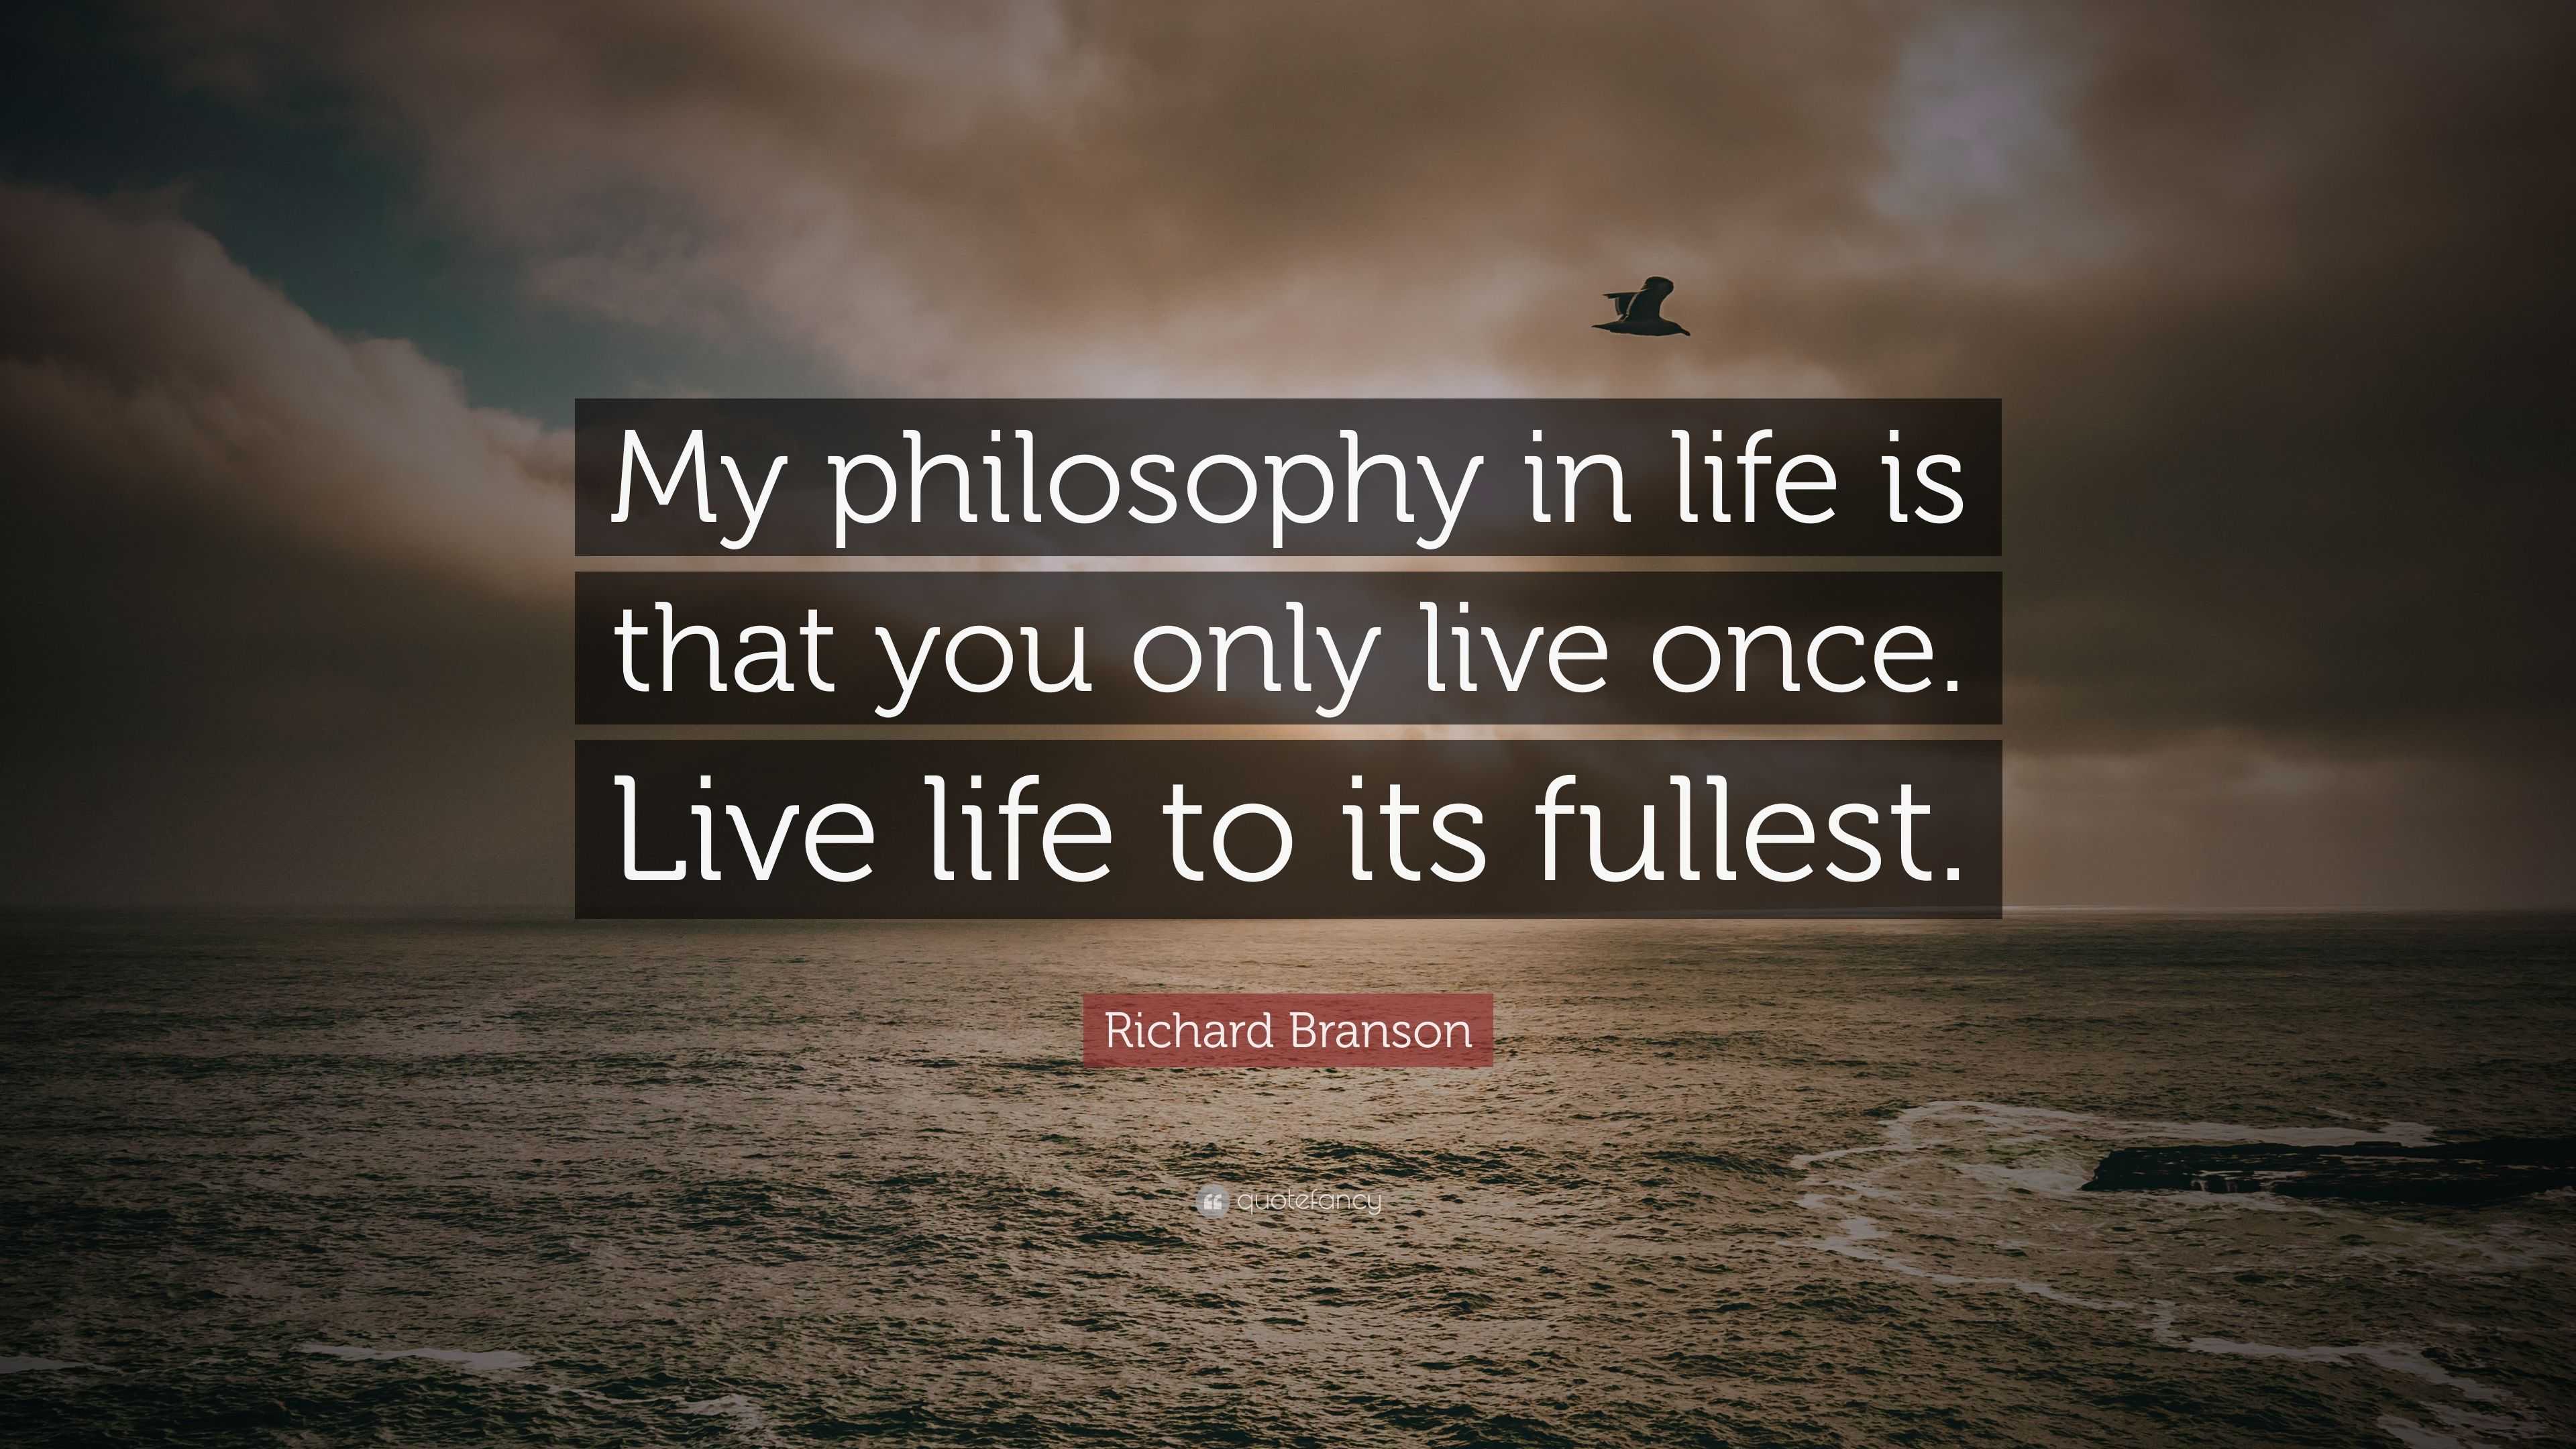 Richard Branson Quote: “My philosophy in life is that you only live ...